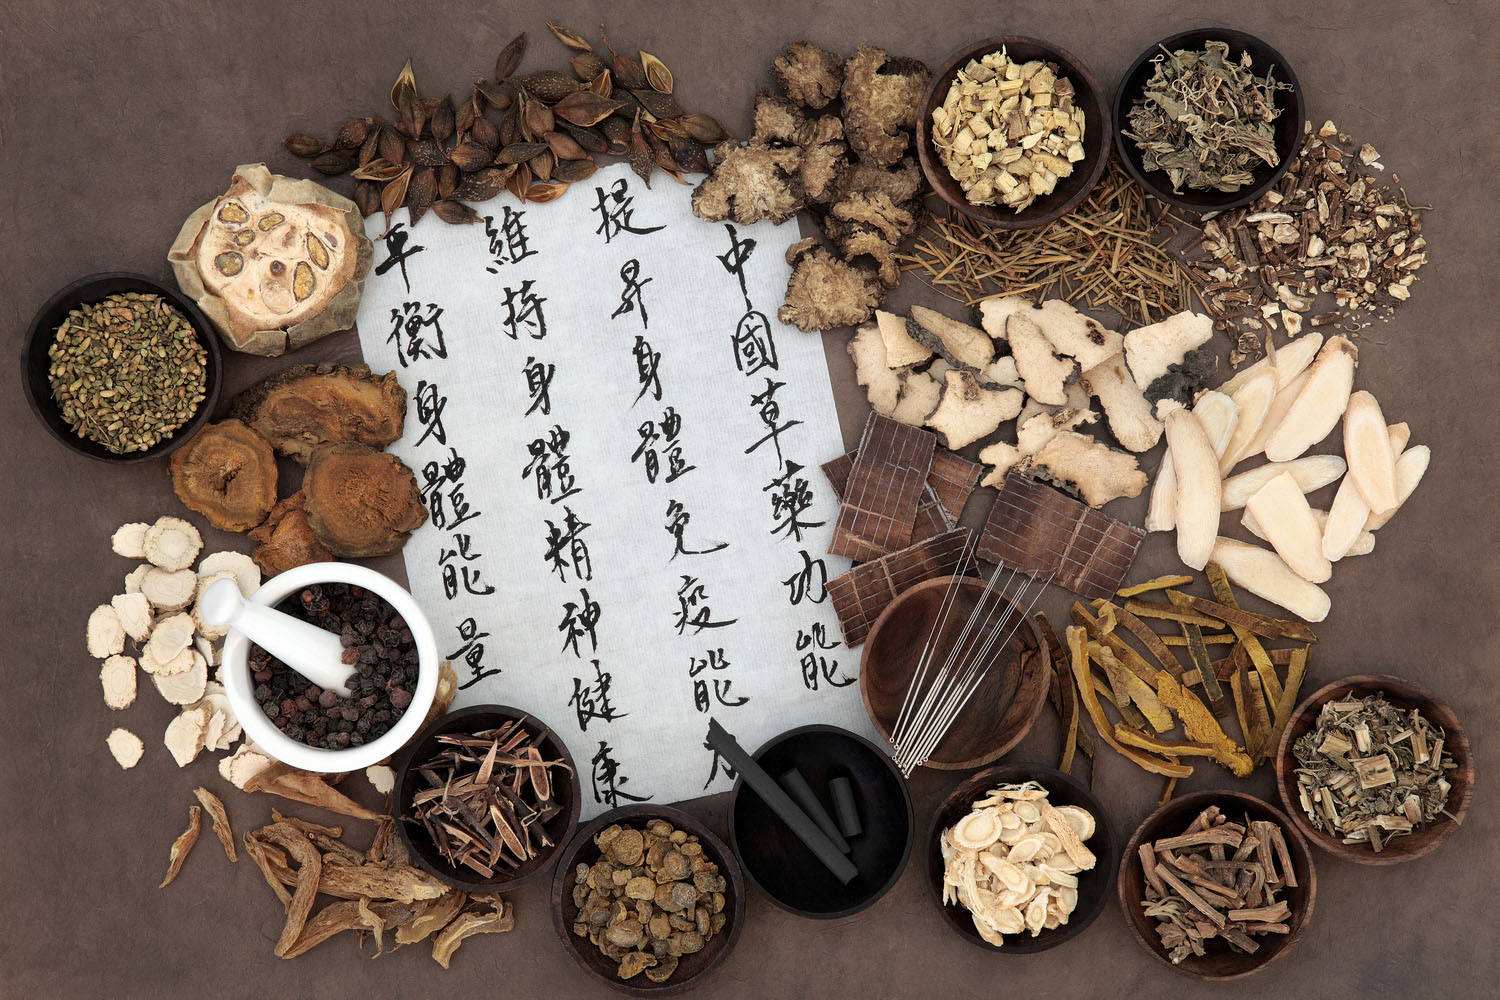 Chinese herbal medicine with acupuncture needles and asian scrip